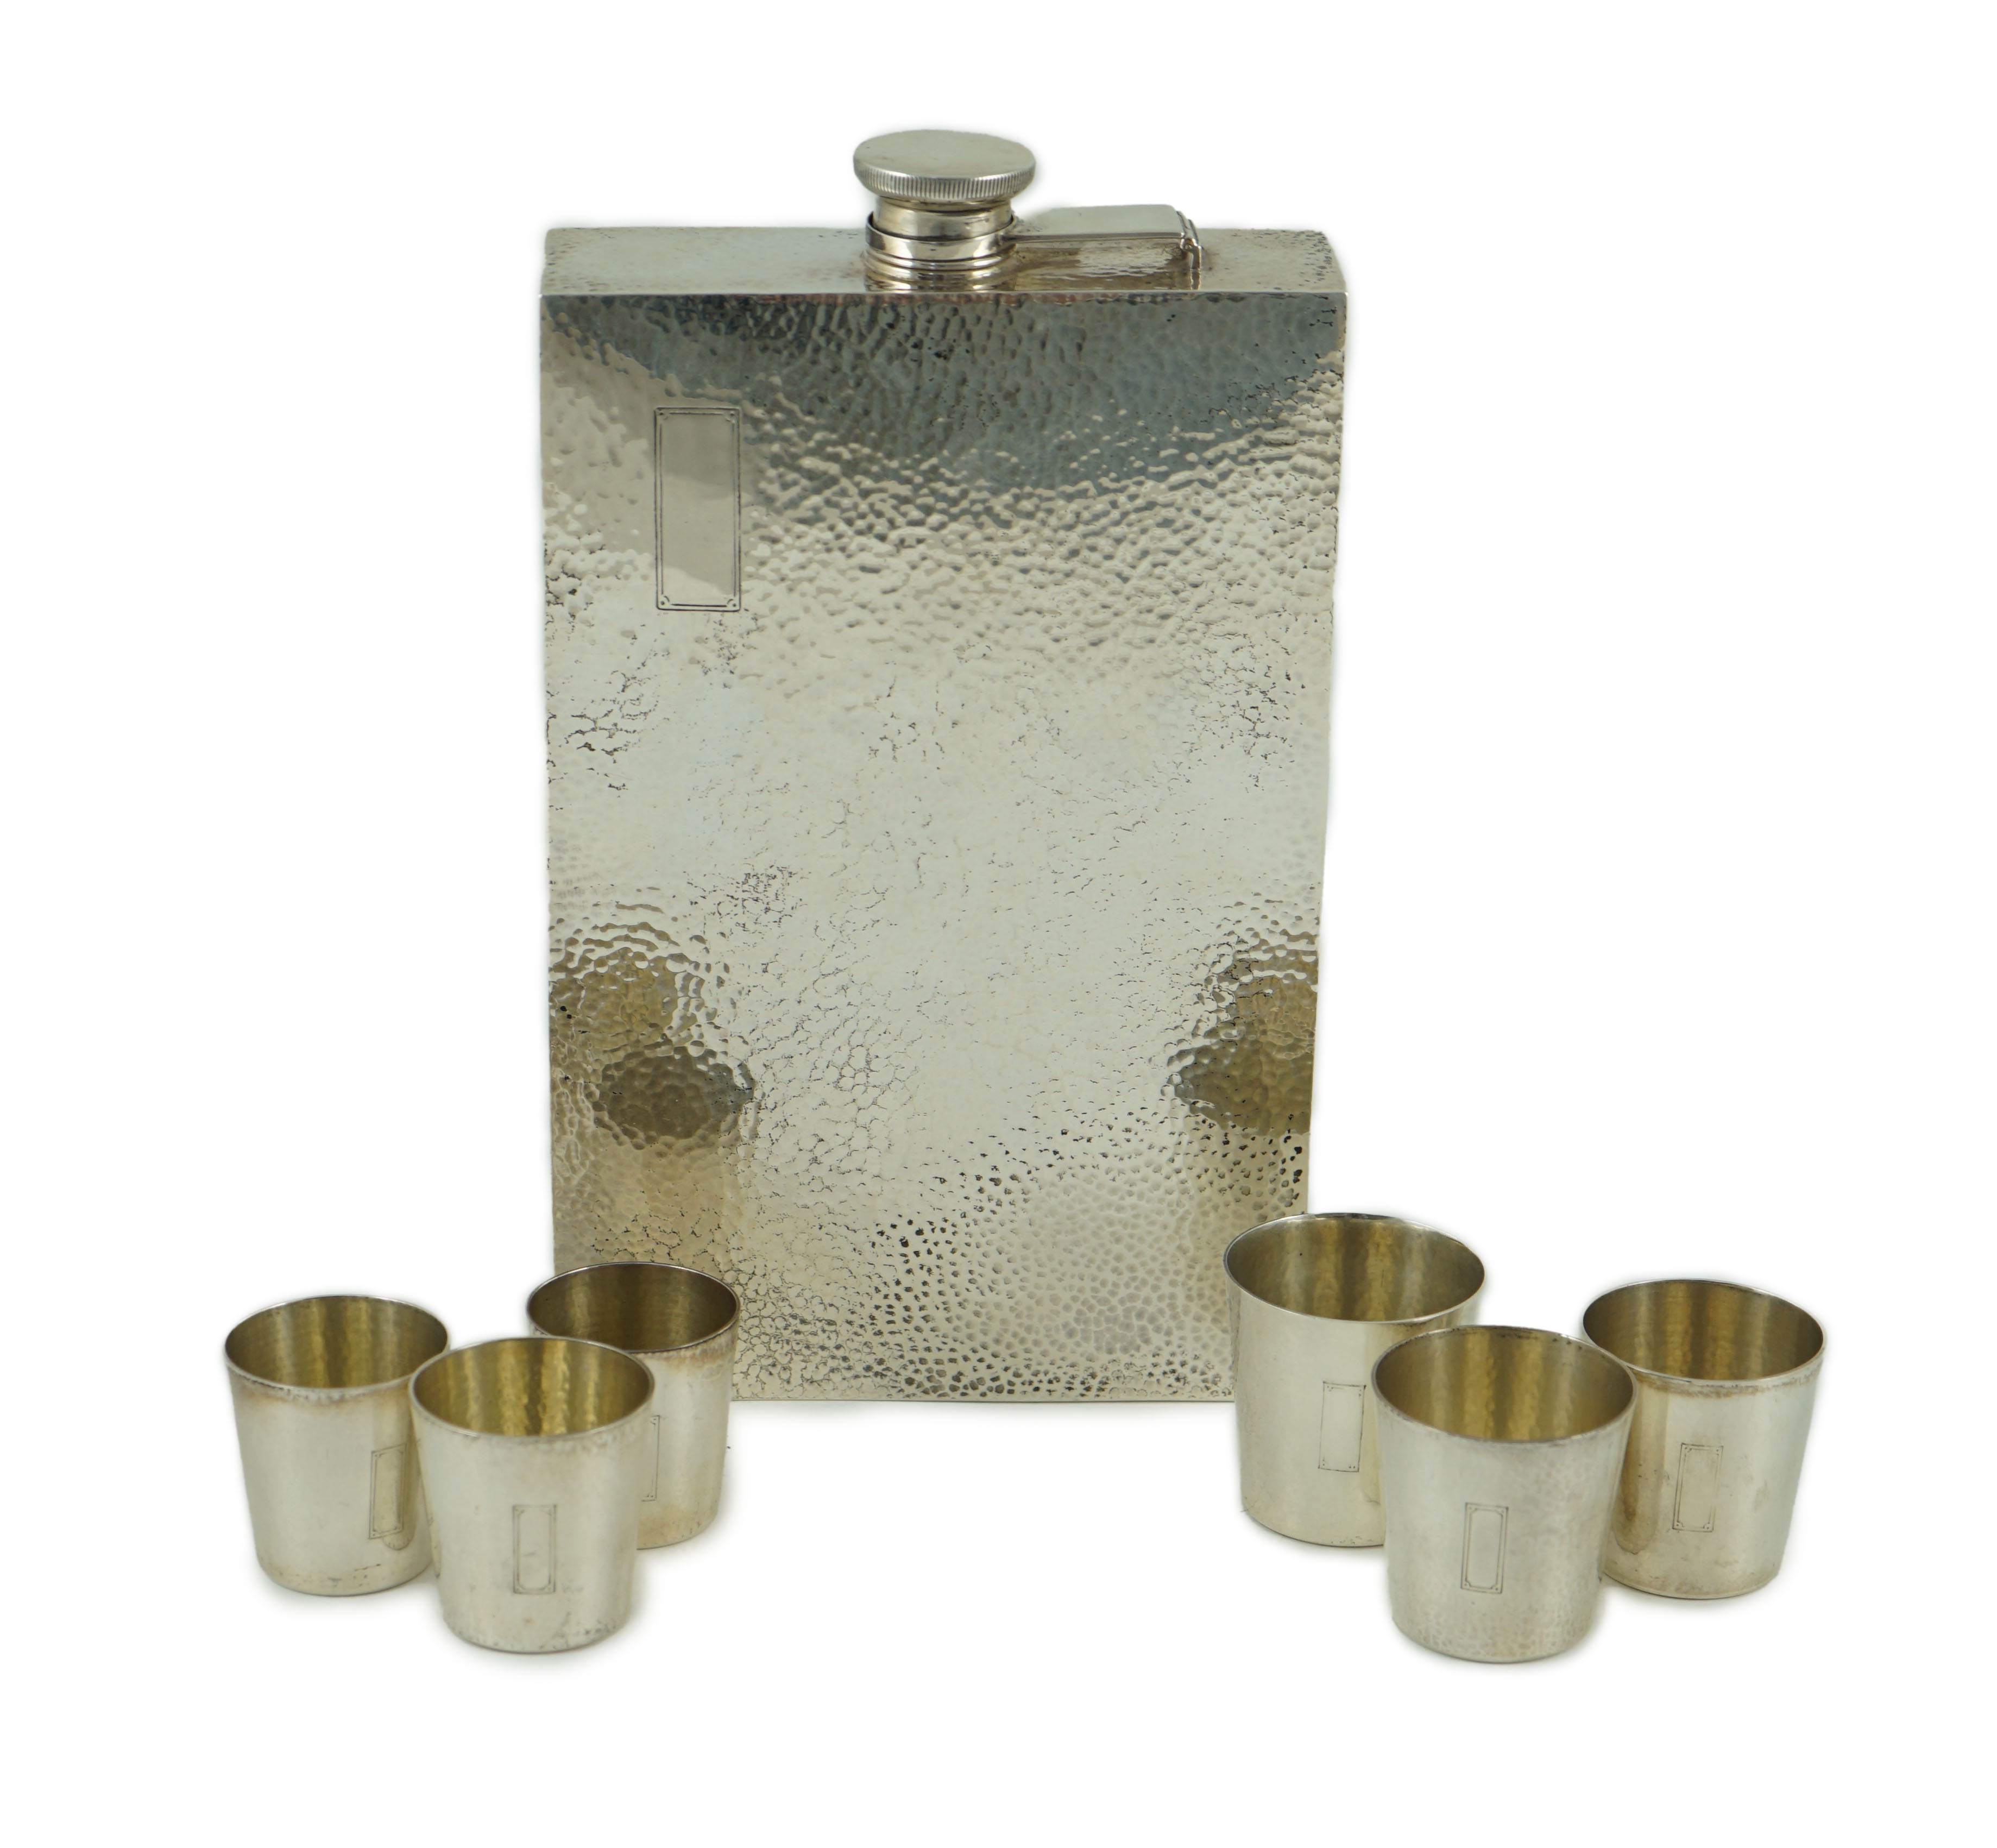 A 1930's/1940's planished sterling silver rectangular flask by Ahrendt & Kautzman, retailed by Cartier and six sterling similar graduated tots, signed Cartier